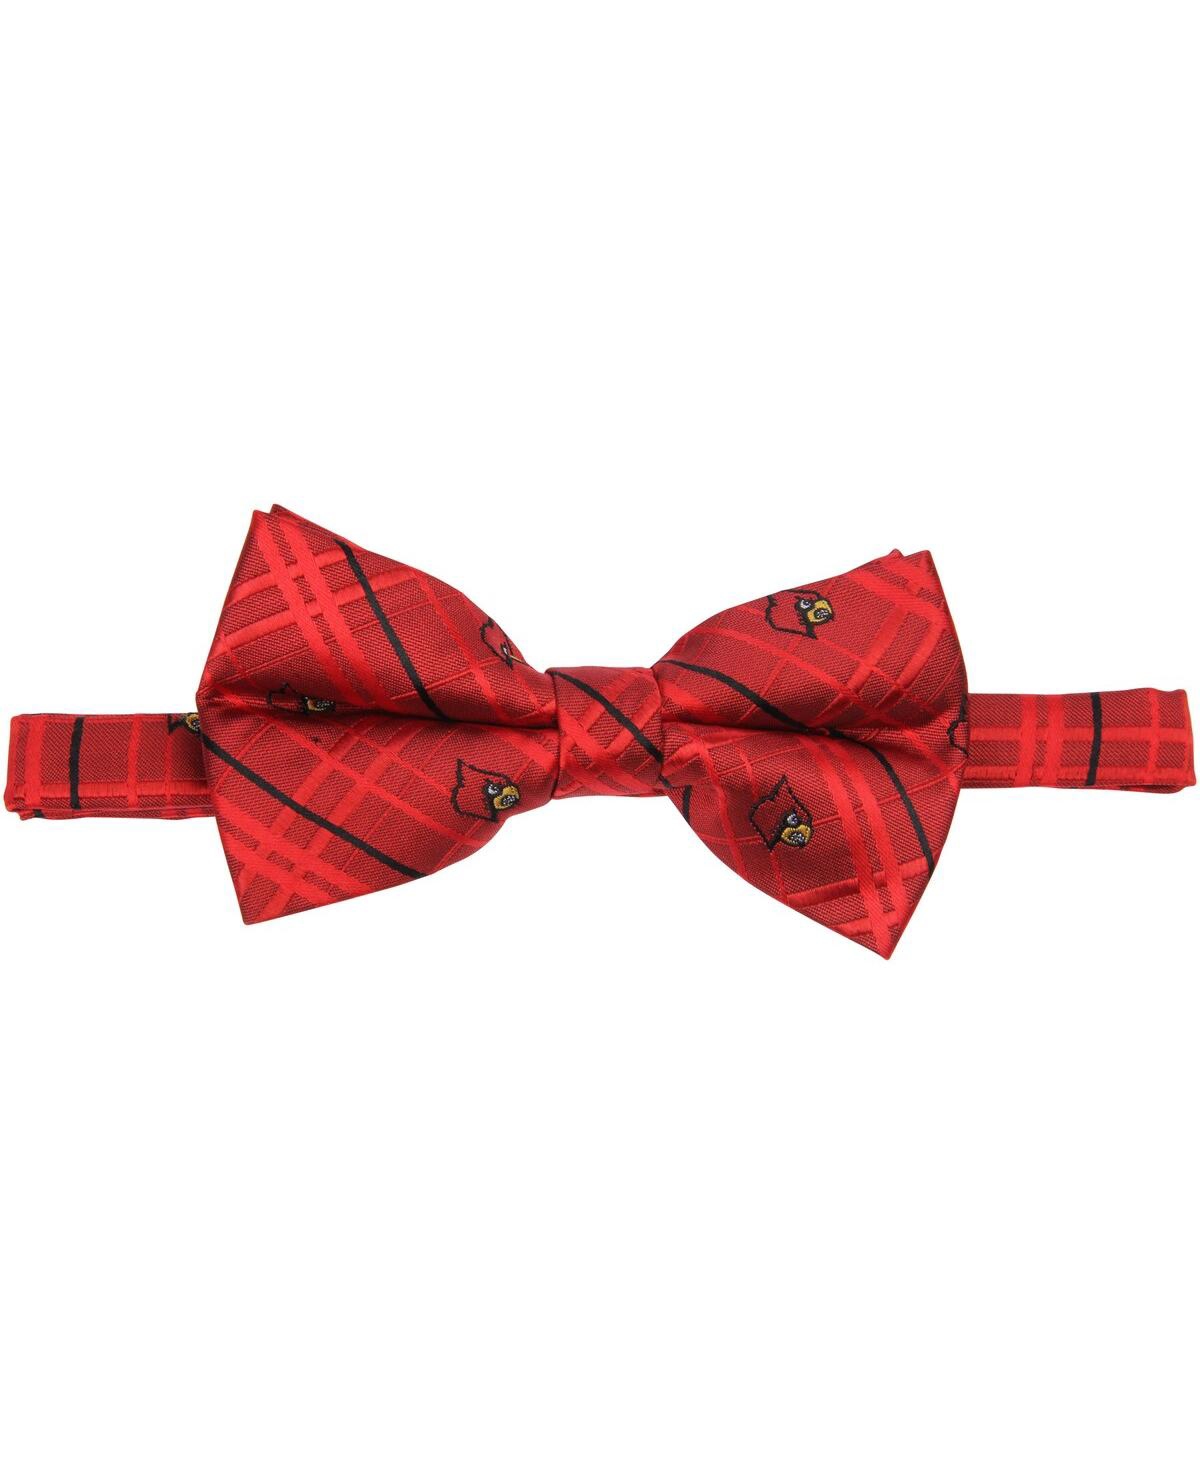 Eagles Wings Men's Red Louisville Cardinals Oxford Bow Tie